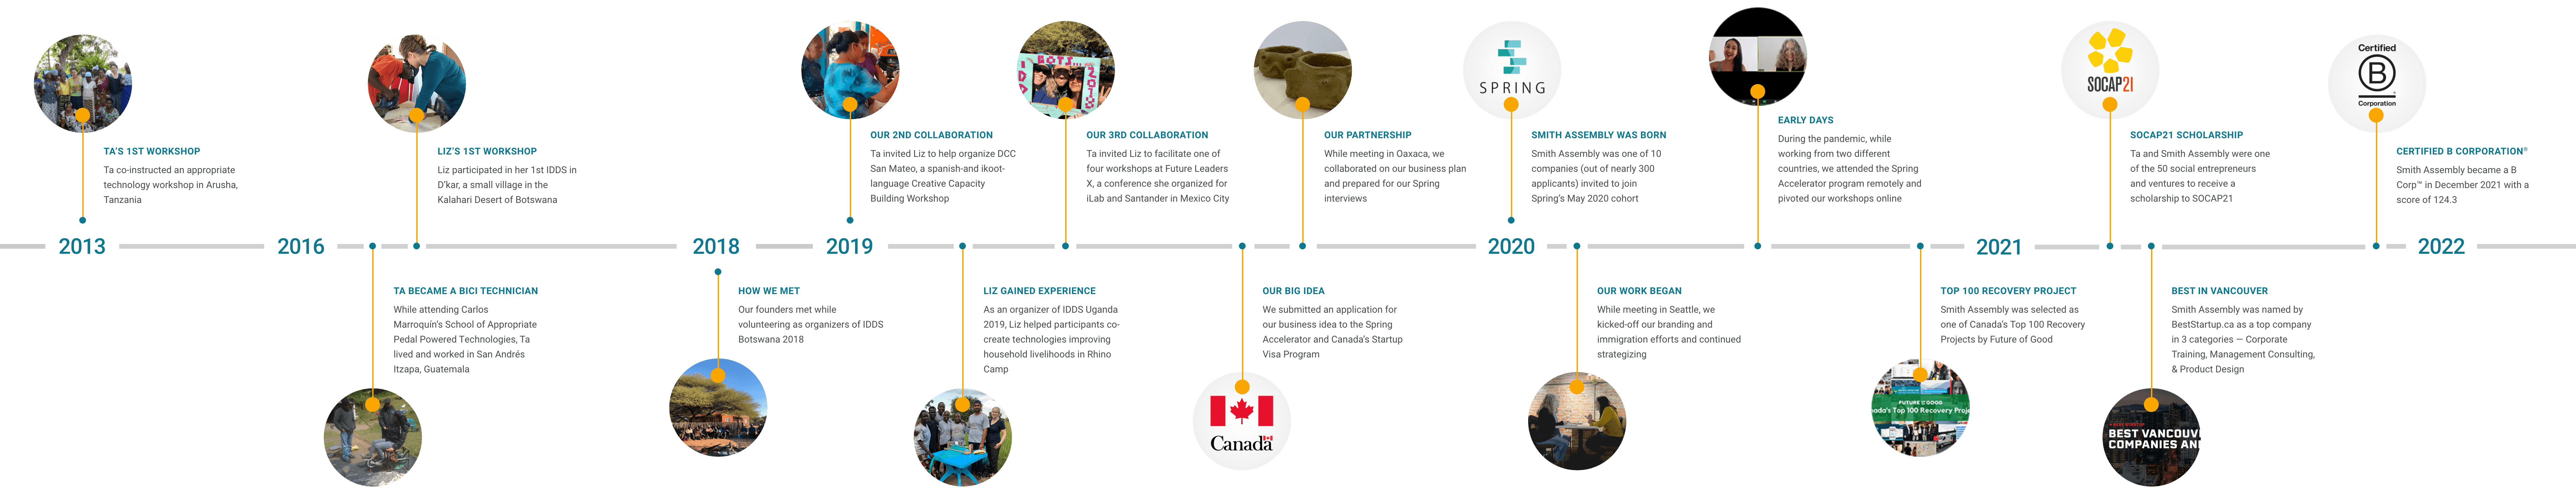 our timeline from ta’s first workshop in 2013 to smith assembly’s founding and our selection as one of canada’s top 100 recovery projects in 2020 to our certification as a b corp in 2021